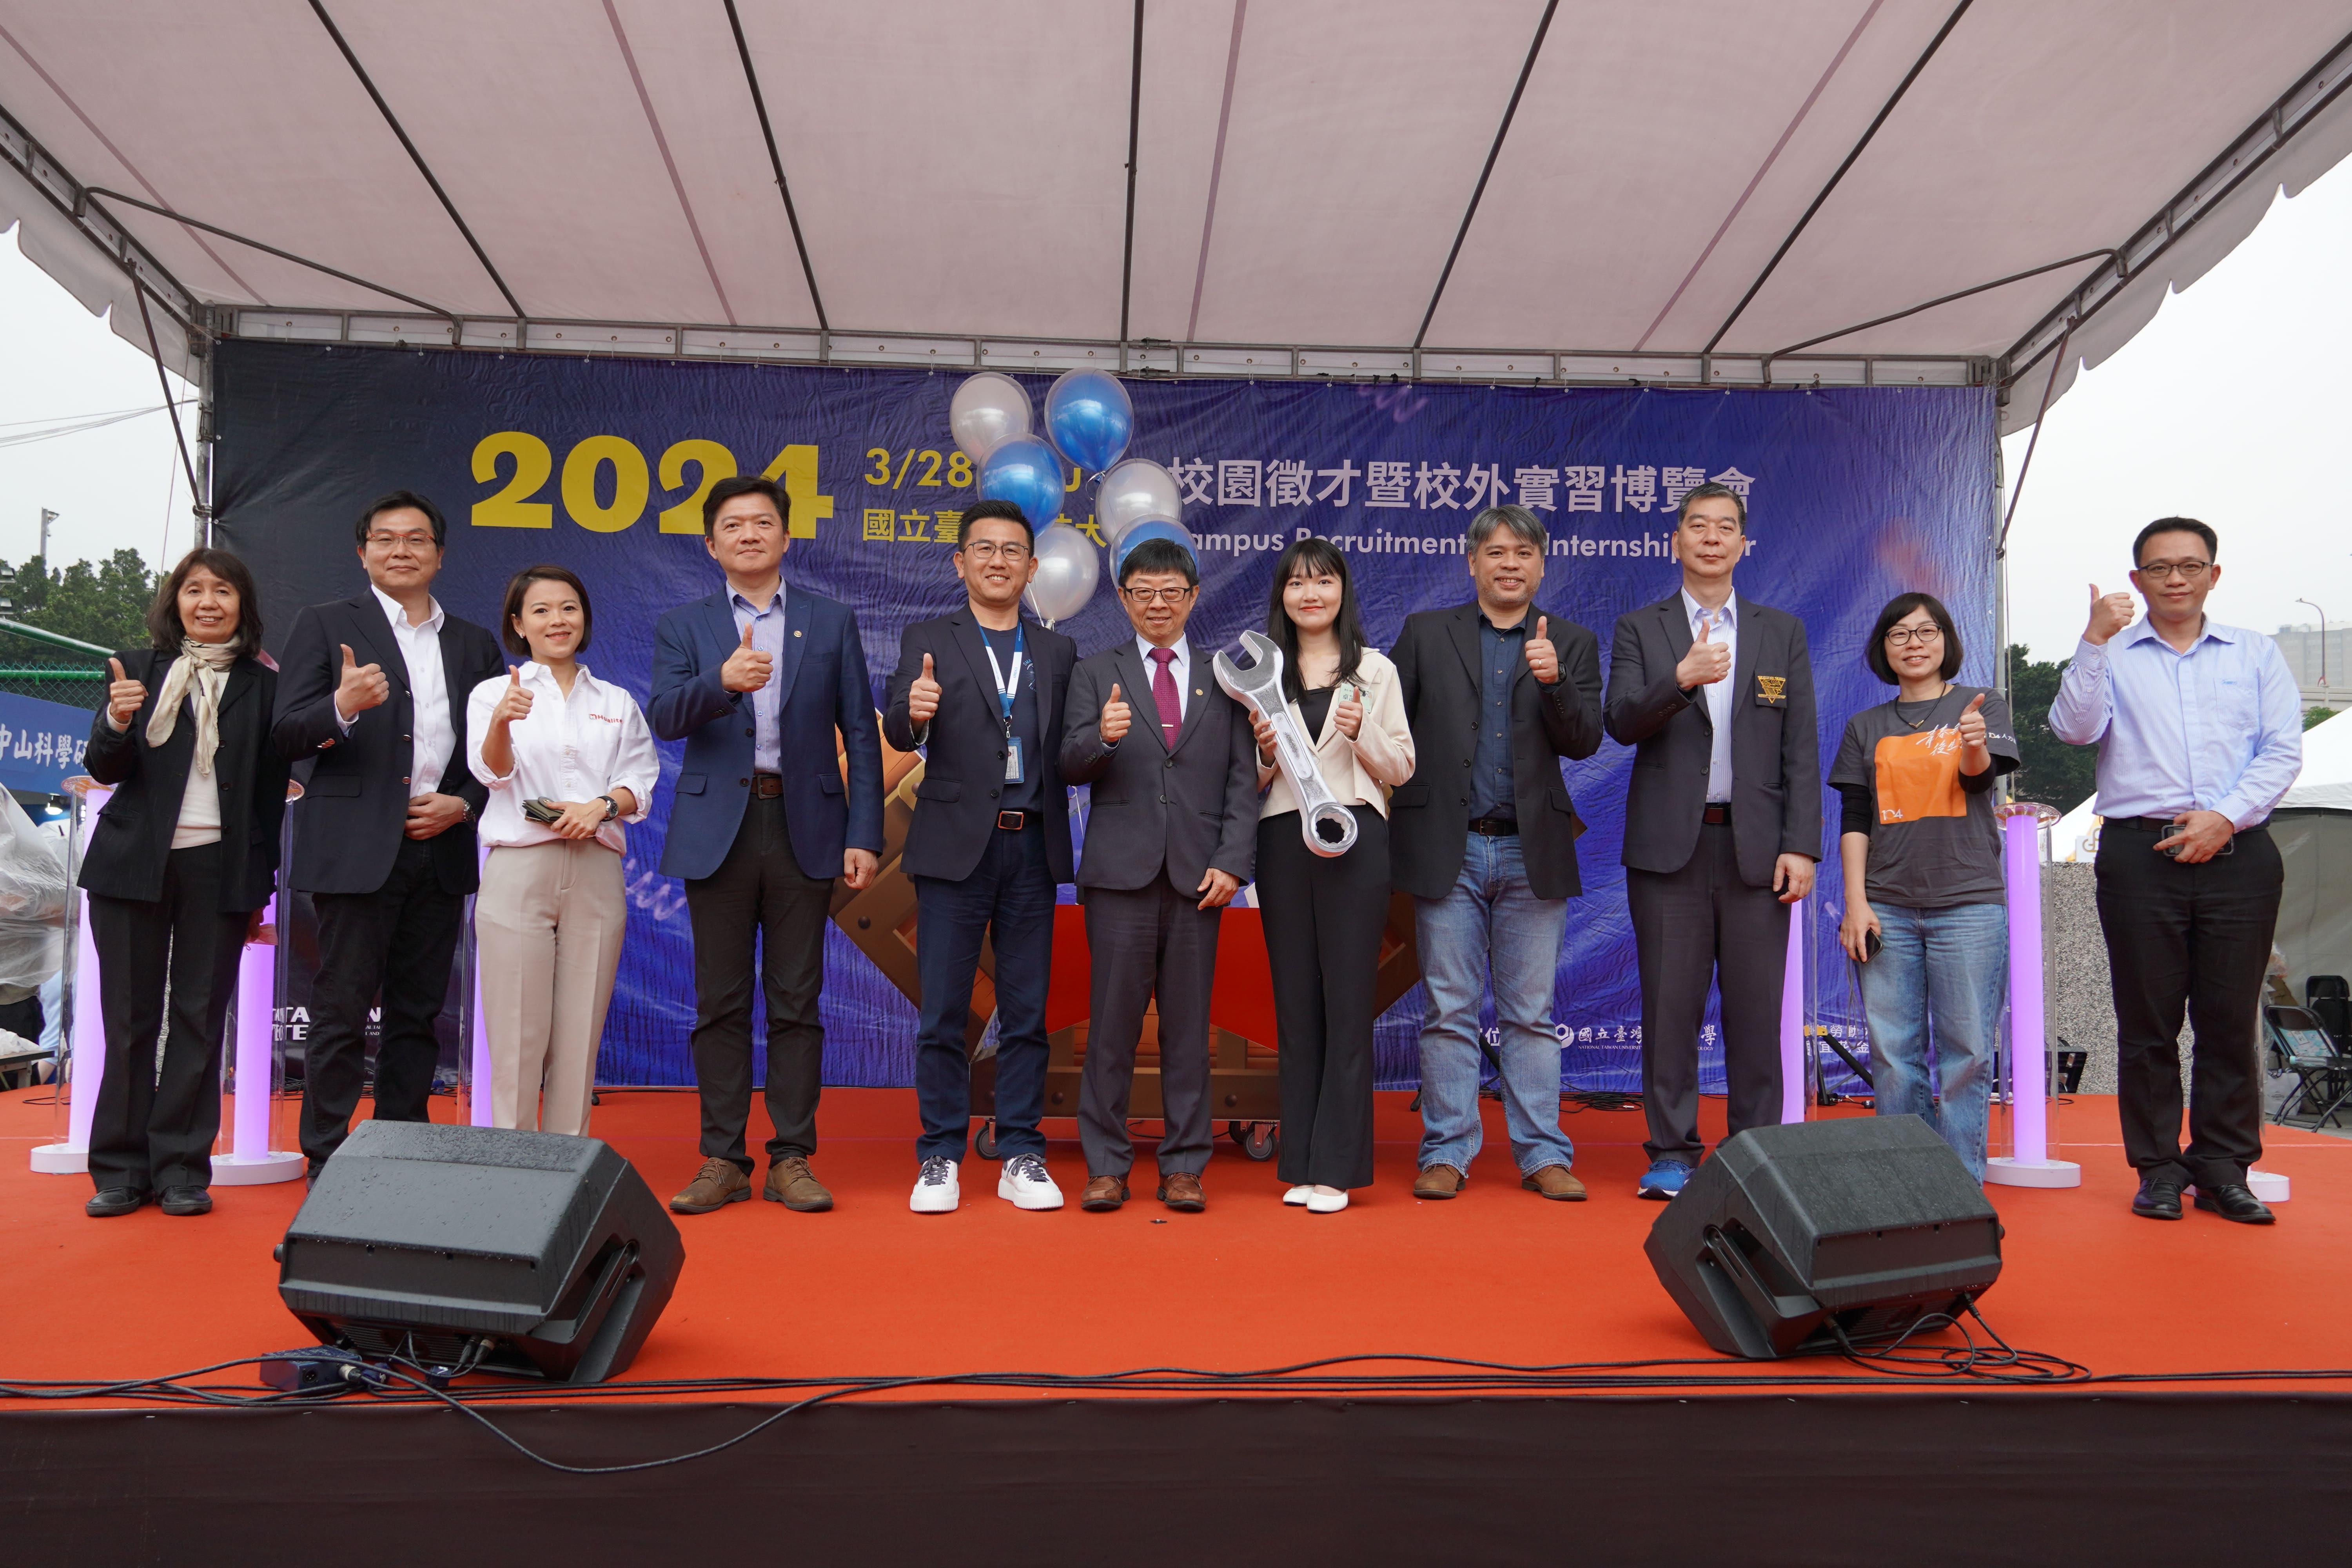 The group photo of the opening ceremony of the jobfair at Taiwan Tech.